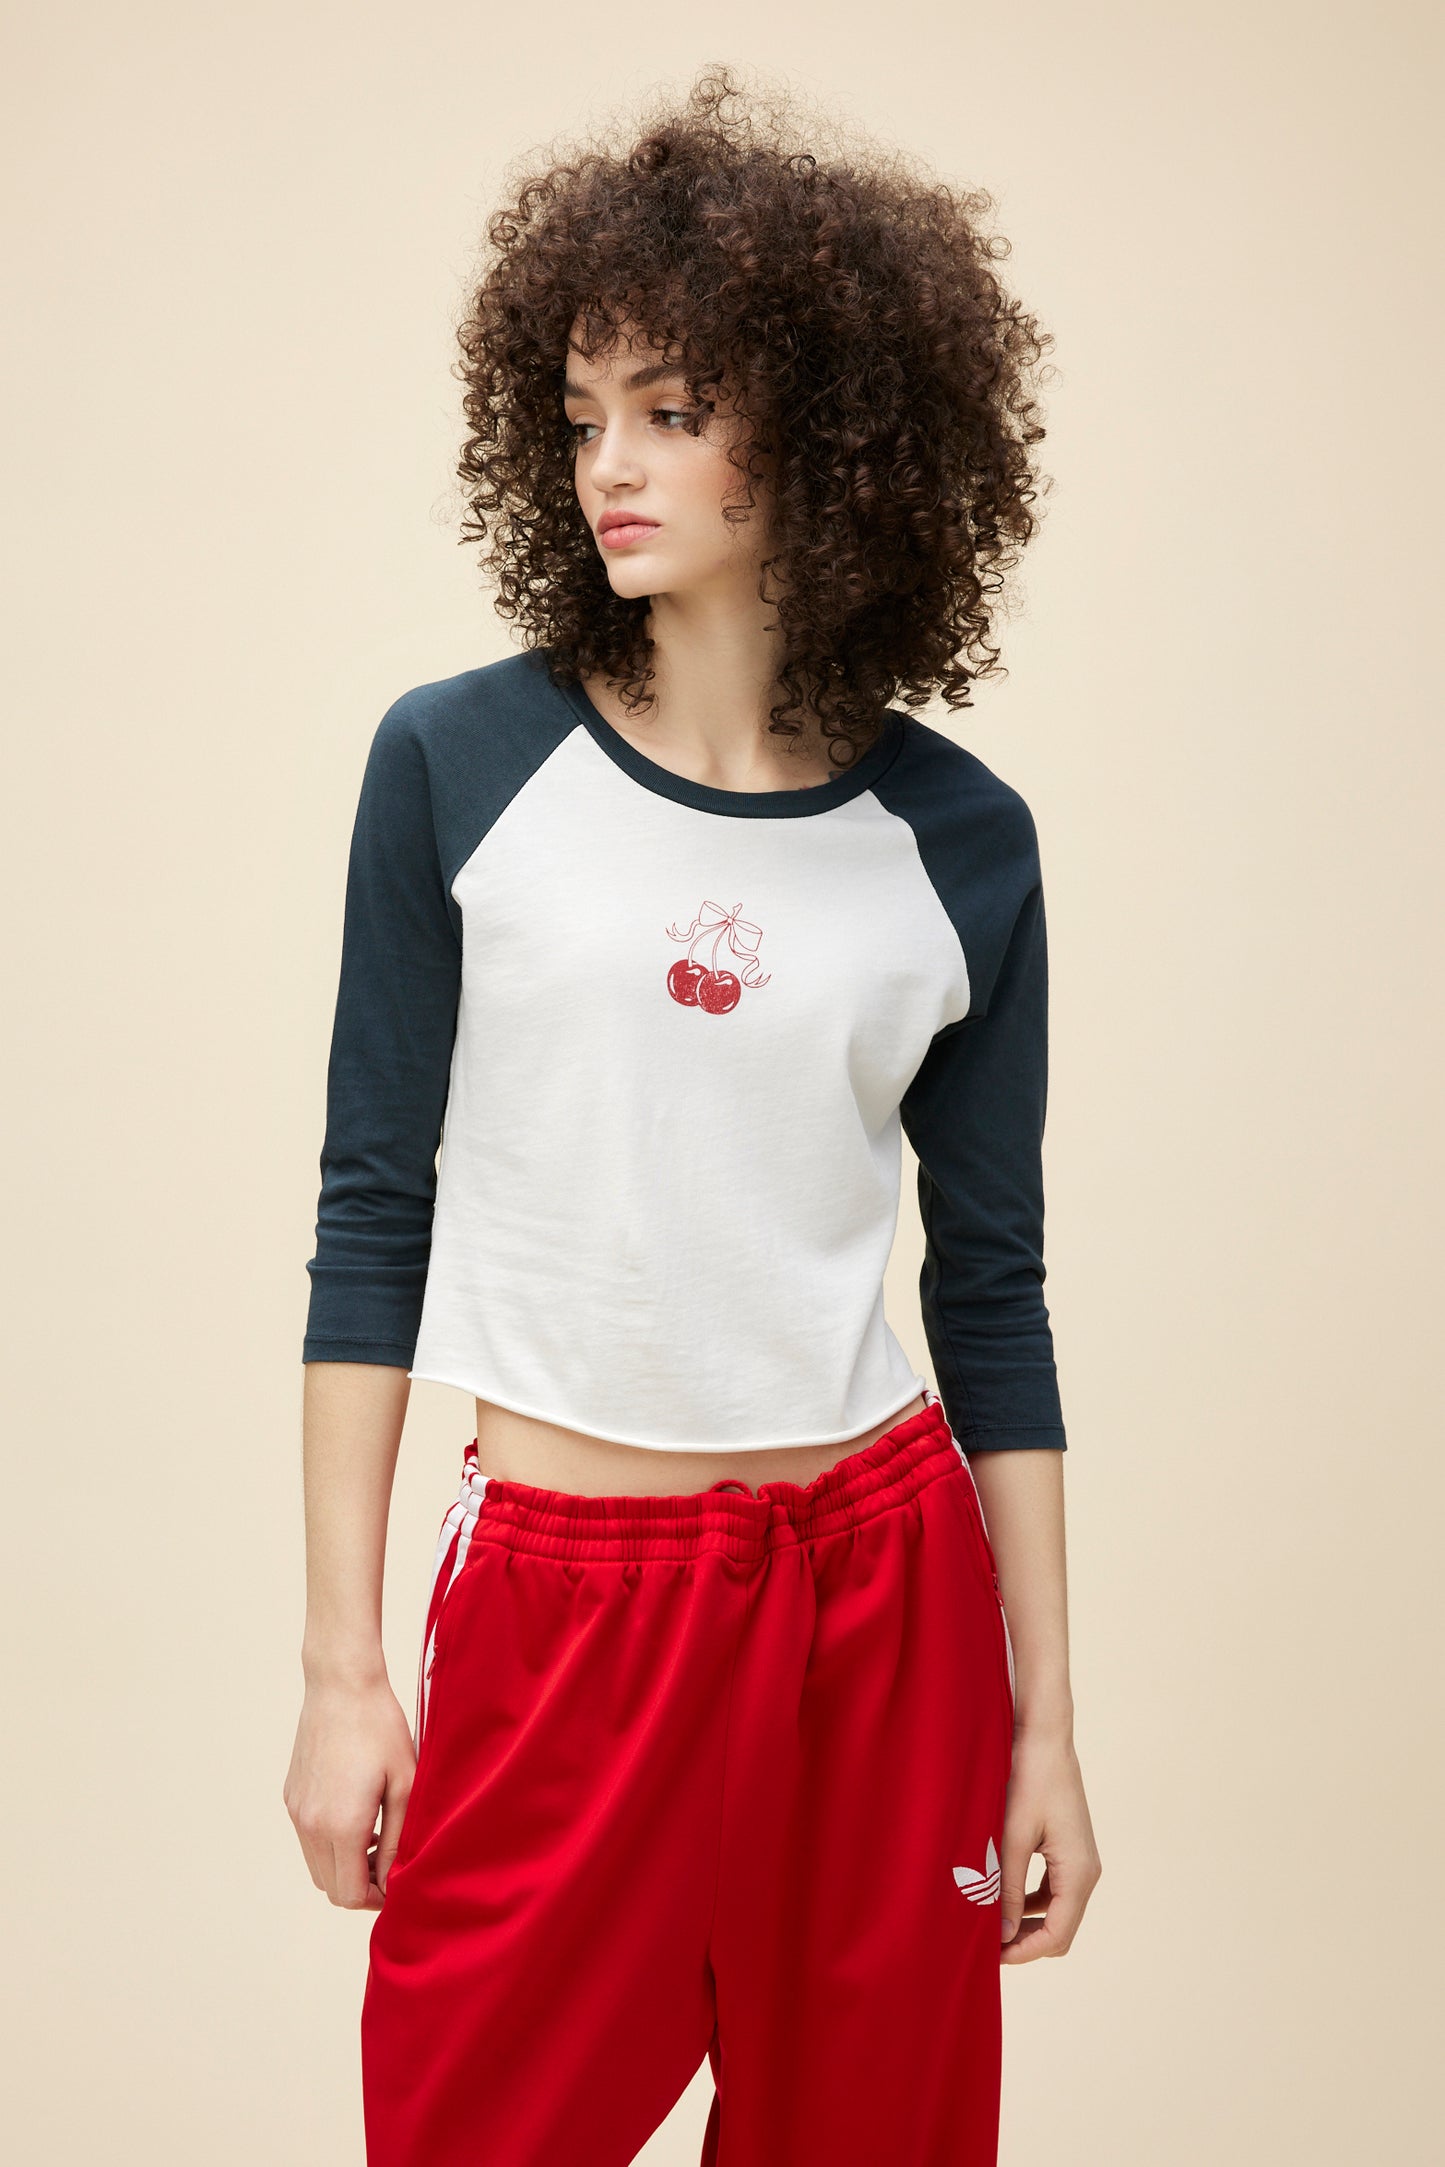 A curly-haired model wears a vintage-inspired long sleeve raglan tee with a red cherry graphic on the front.